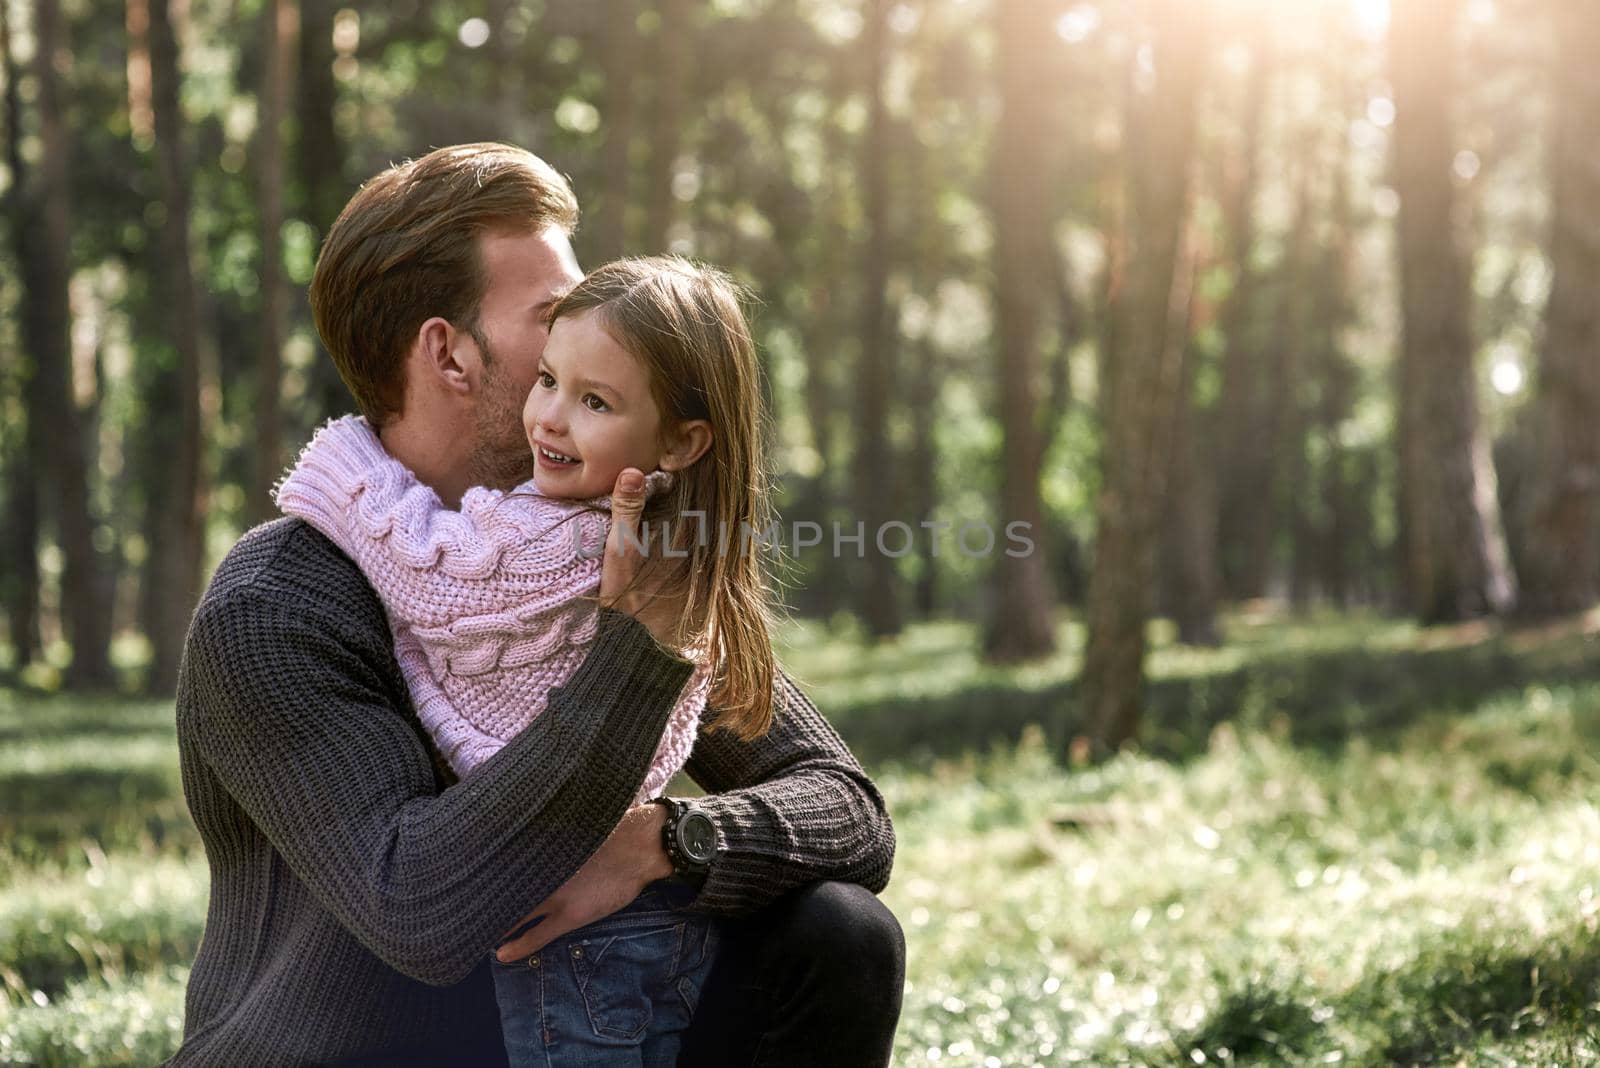 Little girl and her father in the forest. Girl is hugging father. Young man is wearing a dark sweater, girl is in pink bright sweater